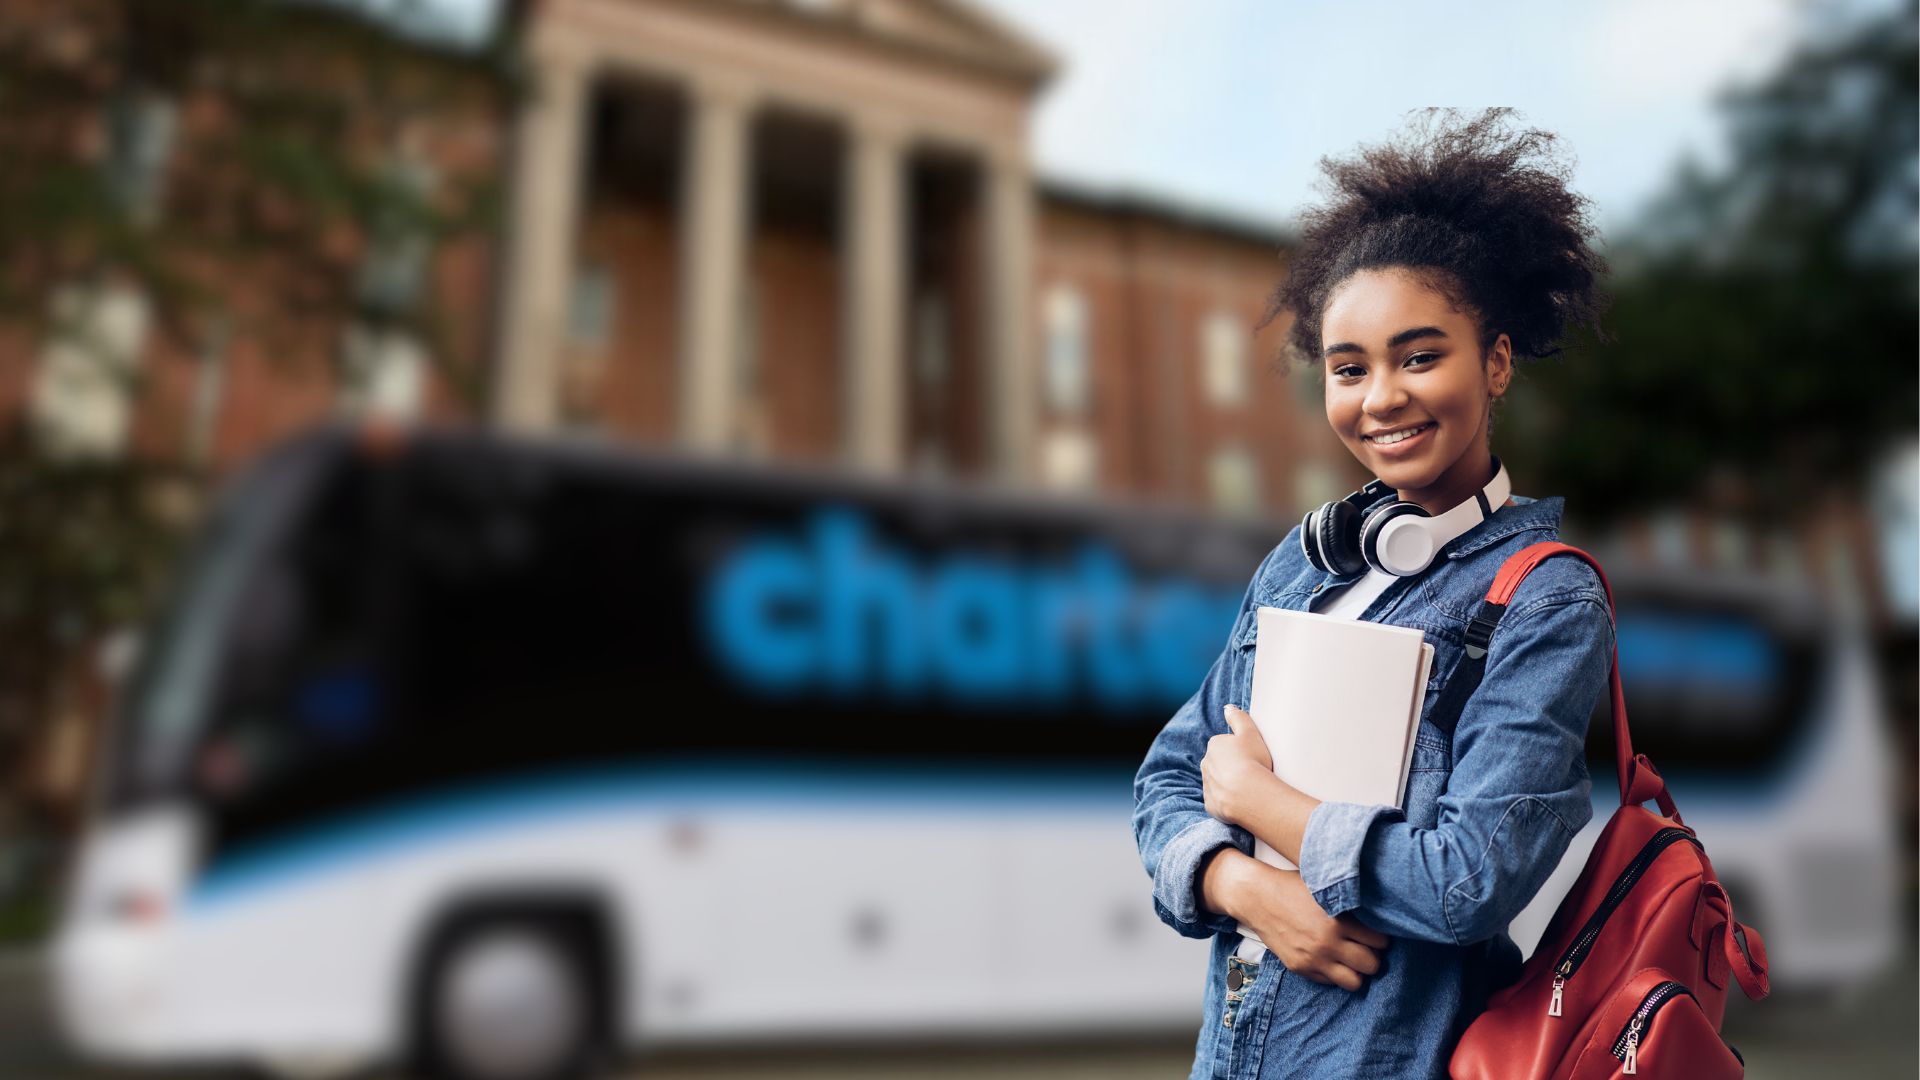 A university student stands in front of a CharterUP campus shuttle.